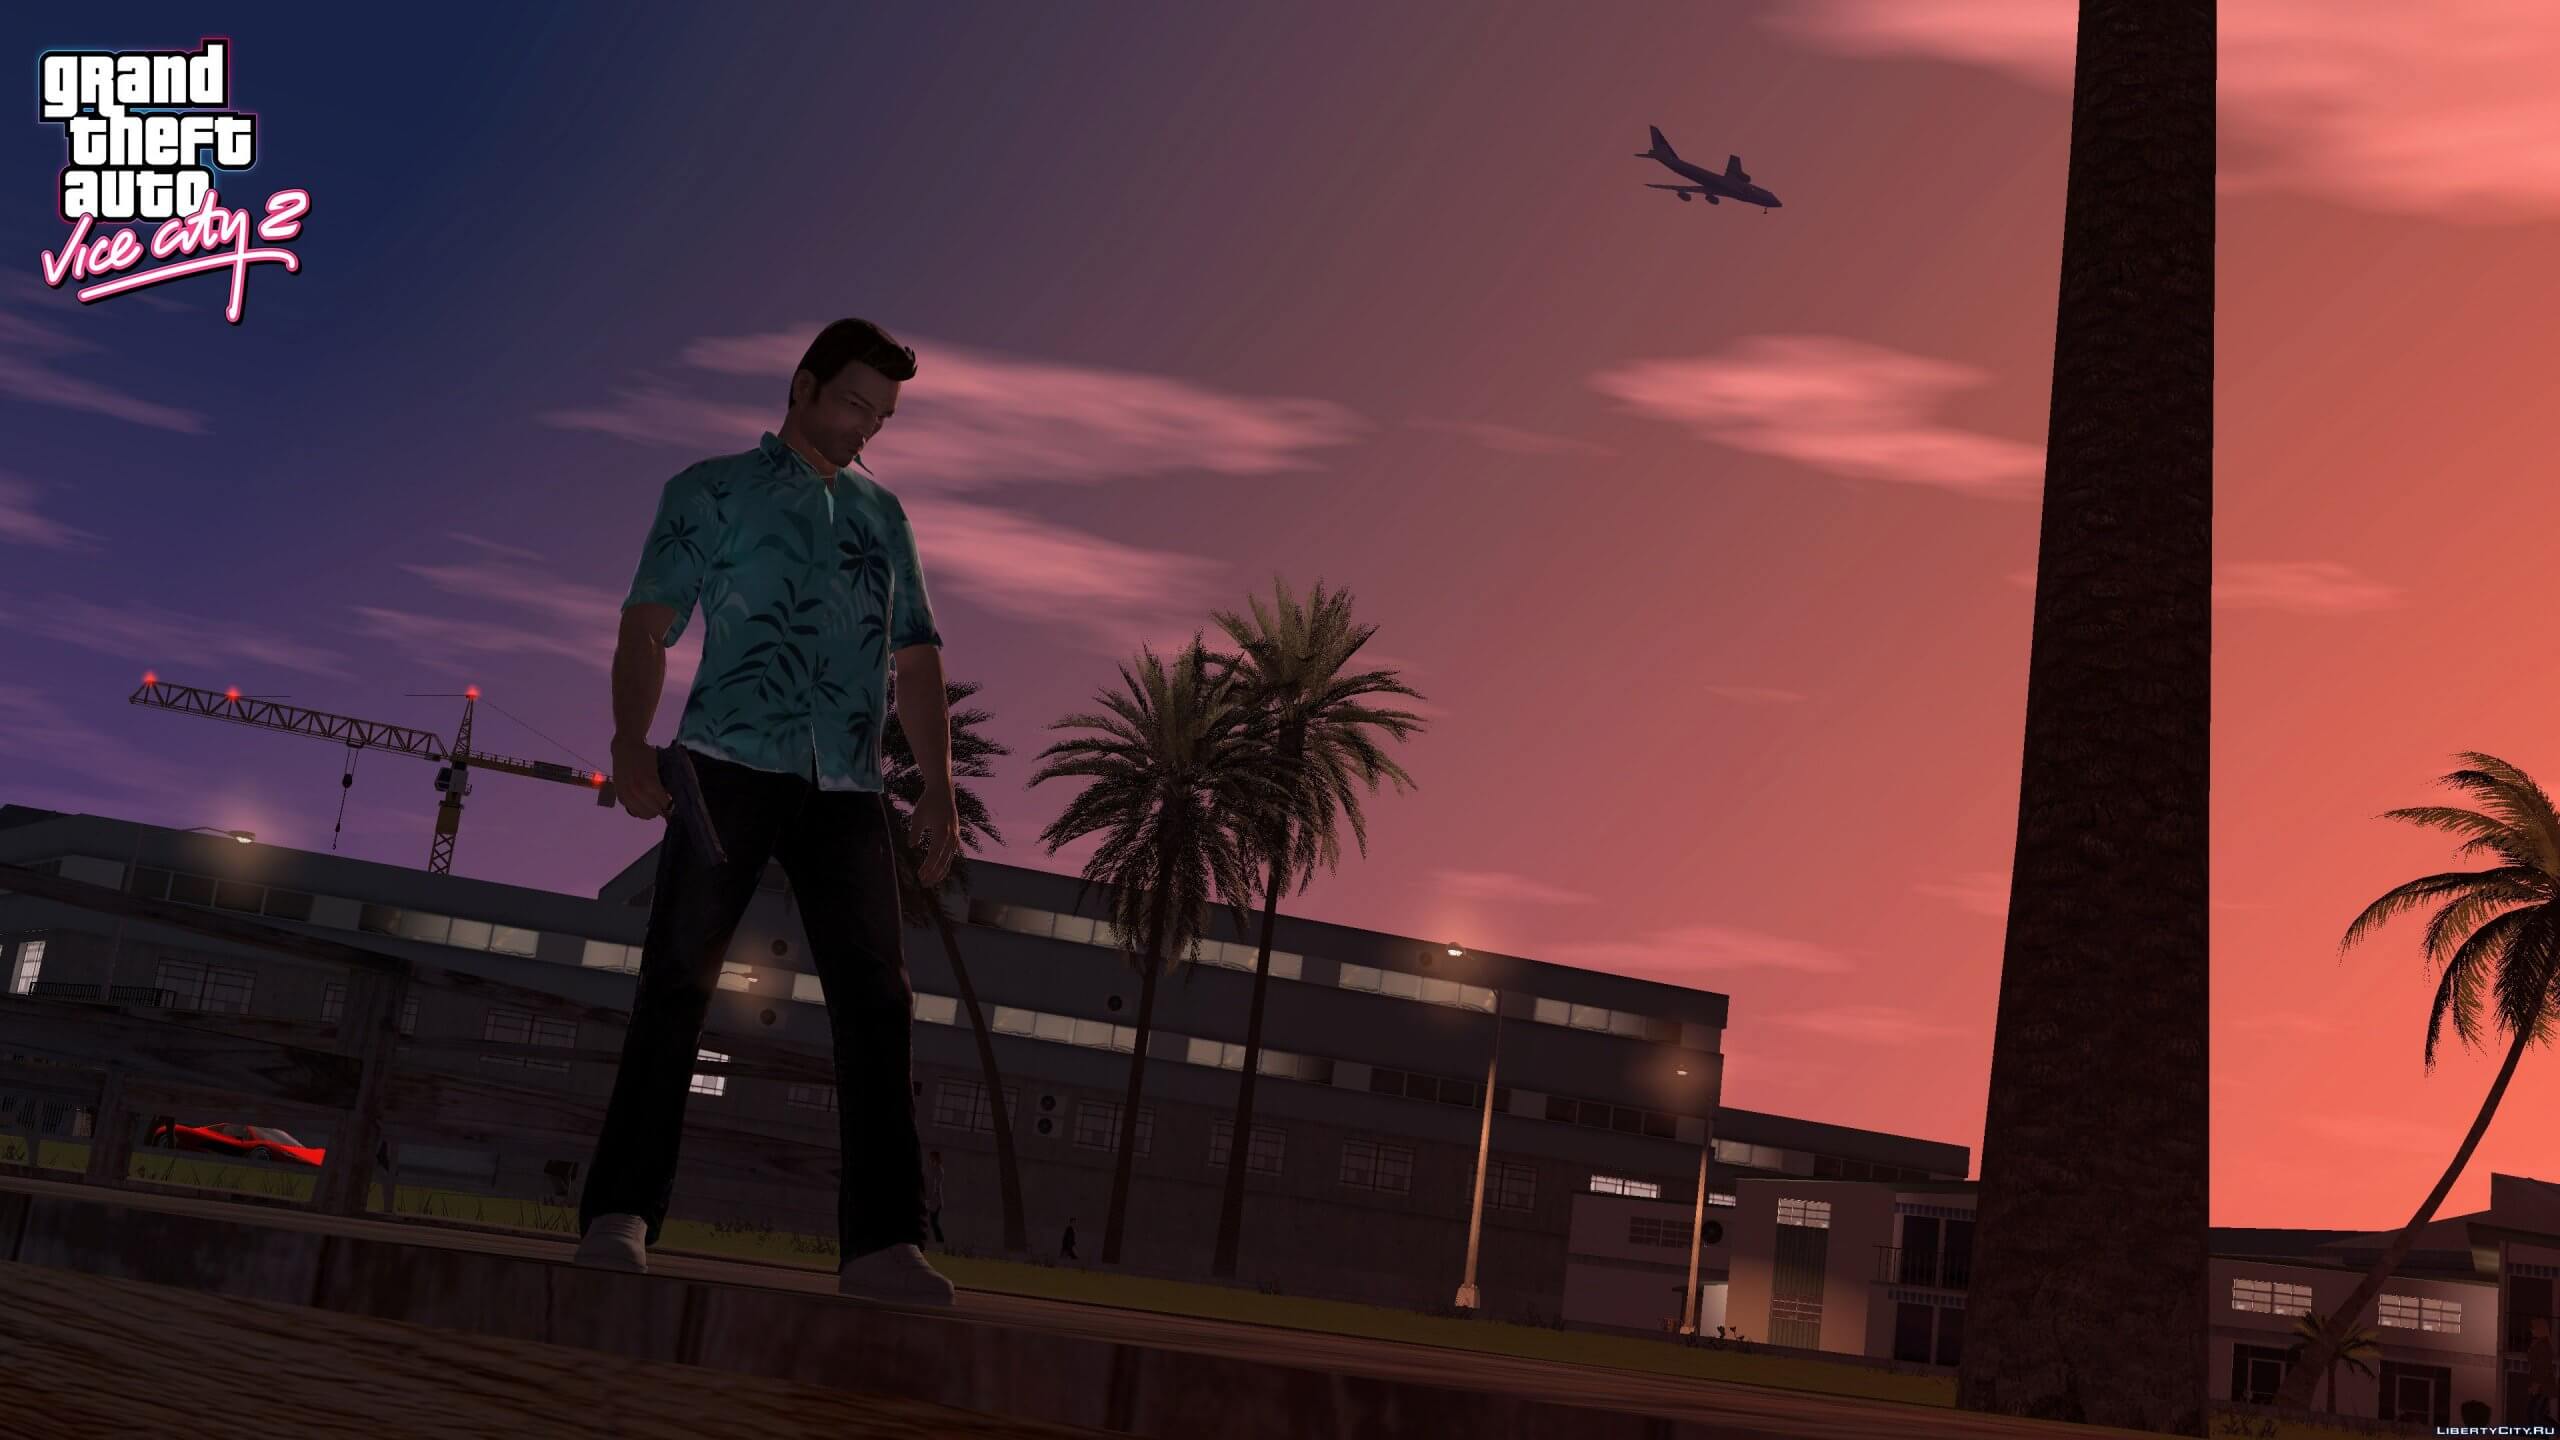 rermaster no oficial gta vice city 3grand theft auto 2 remaster 3 scaled